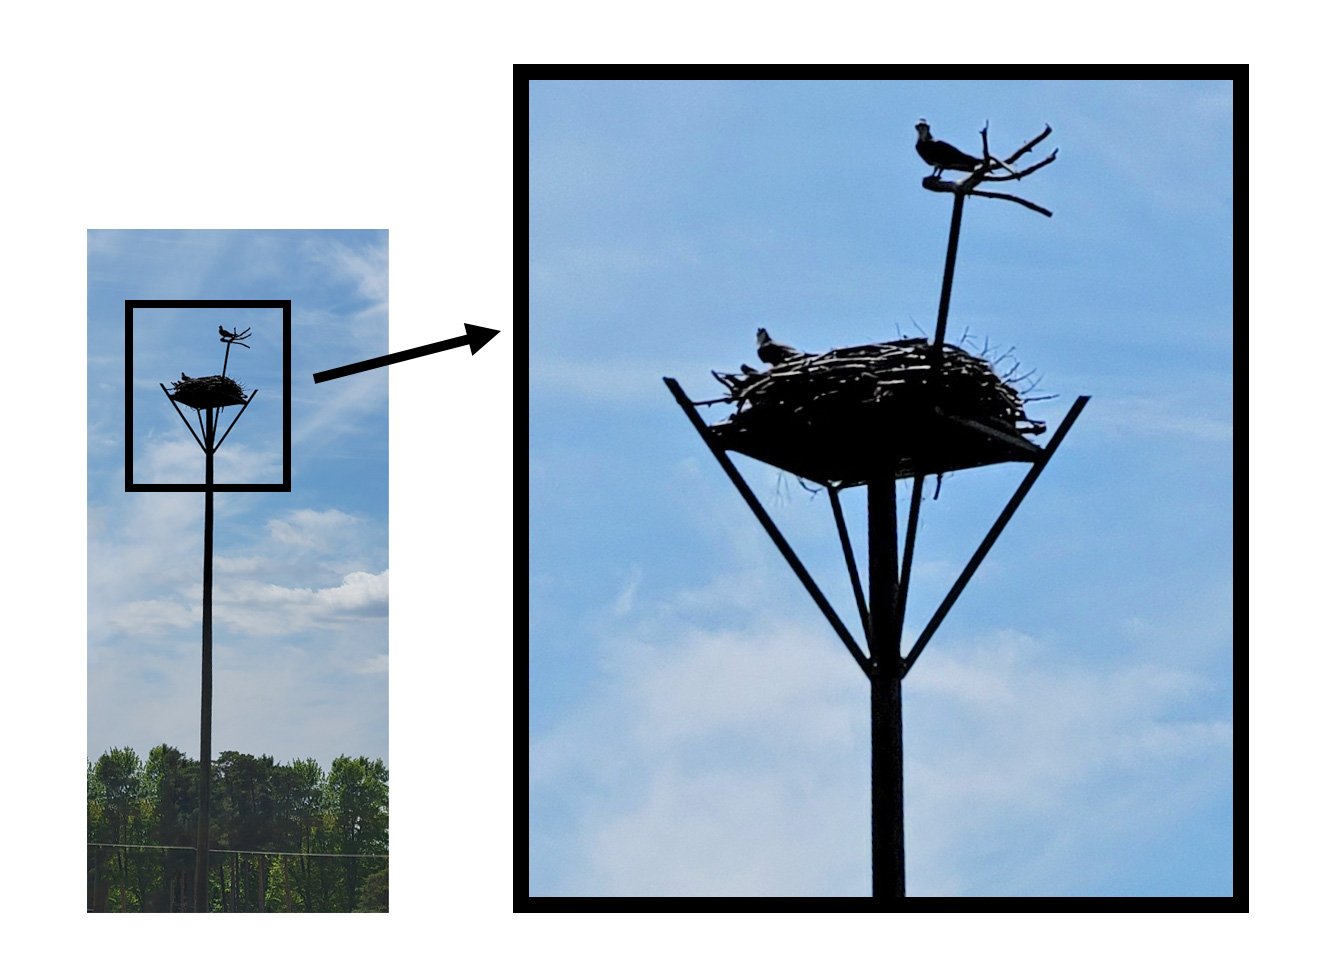 a photo of a very tall man-made osprey nest with two large osprey birds, one in the nest and one on the perch that extends above it.